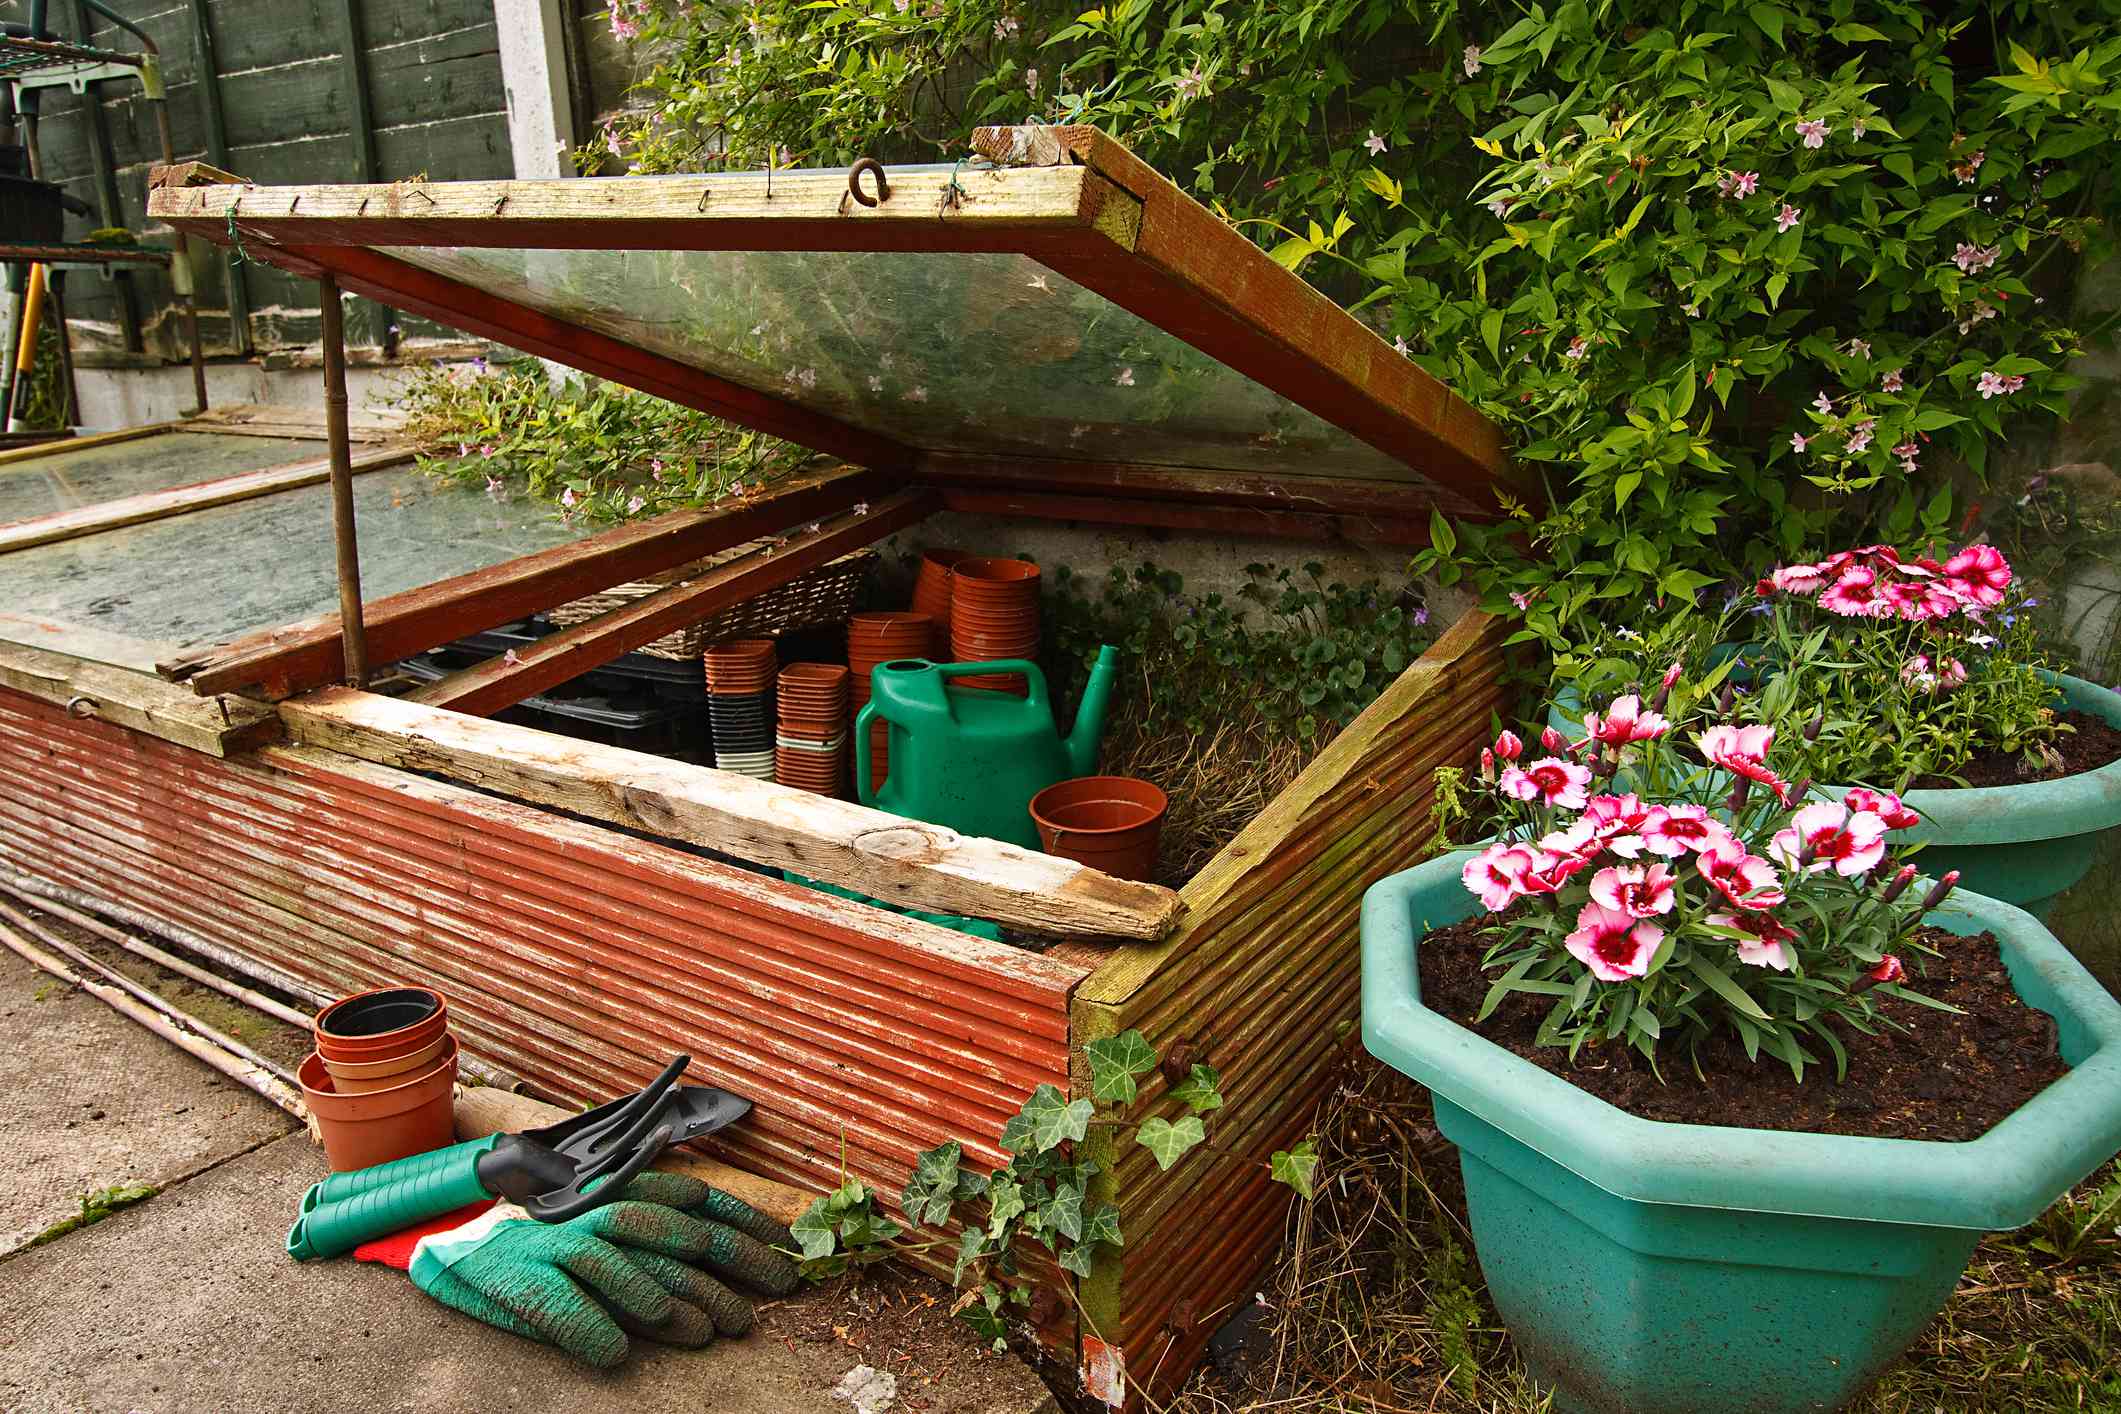 Gardening equipment in a cold frame.